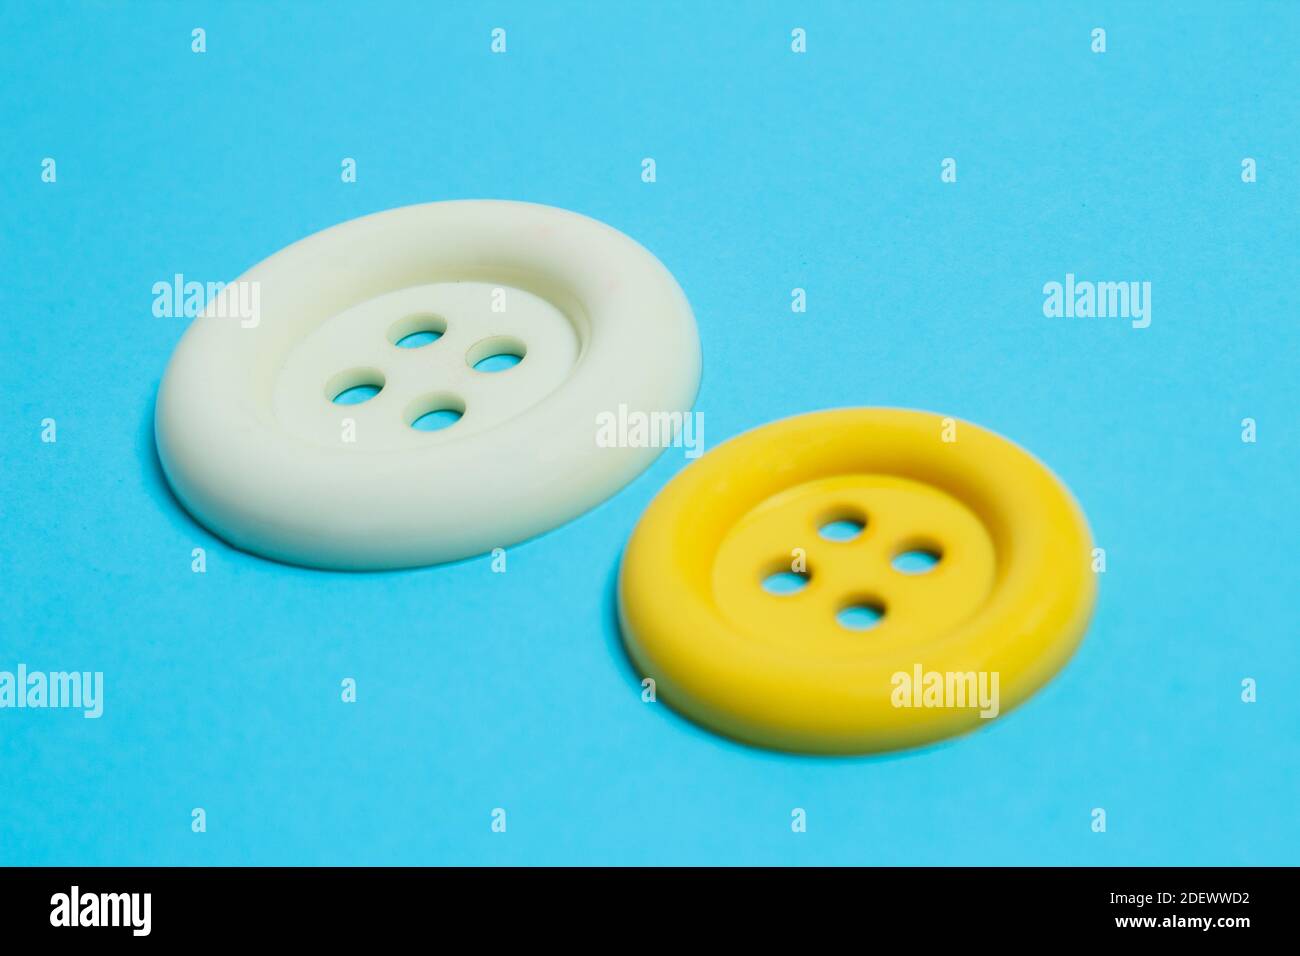 A close-up of two buttons of different sizes and colors on a light blue background. Diversity concept. Stock Photo